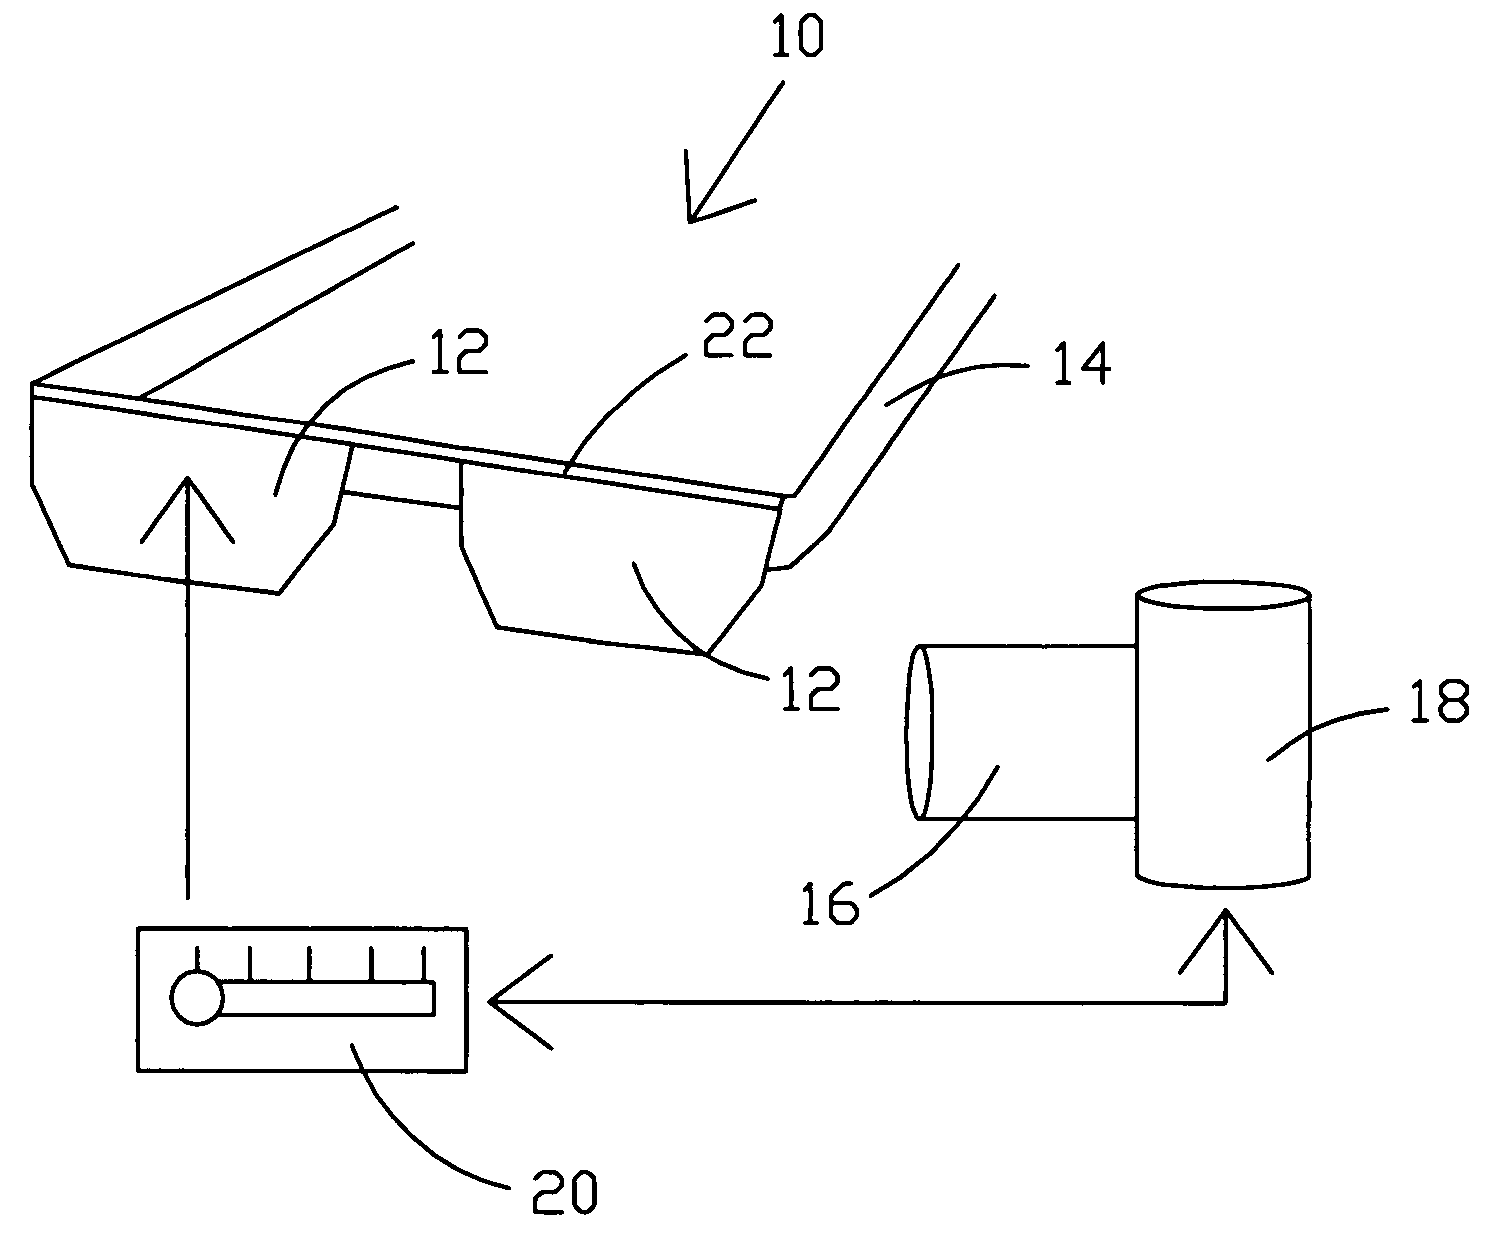 Motion sickness treatment apparatus and method